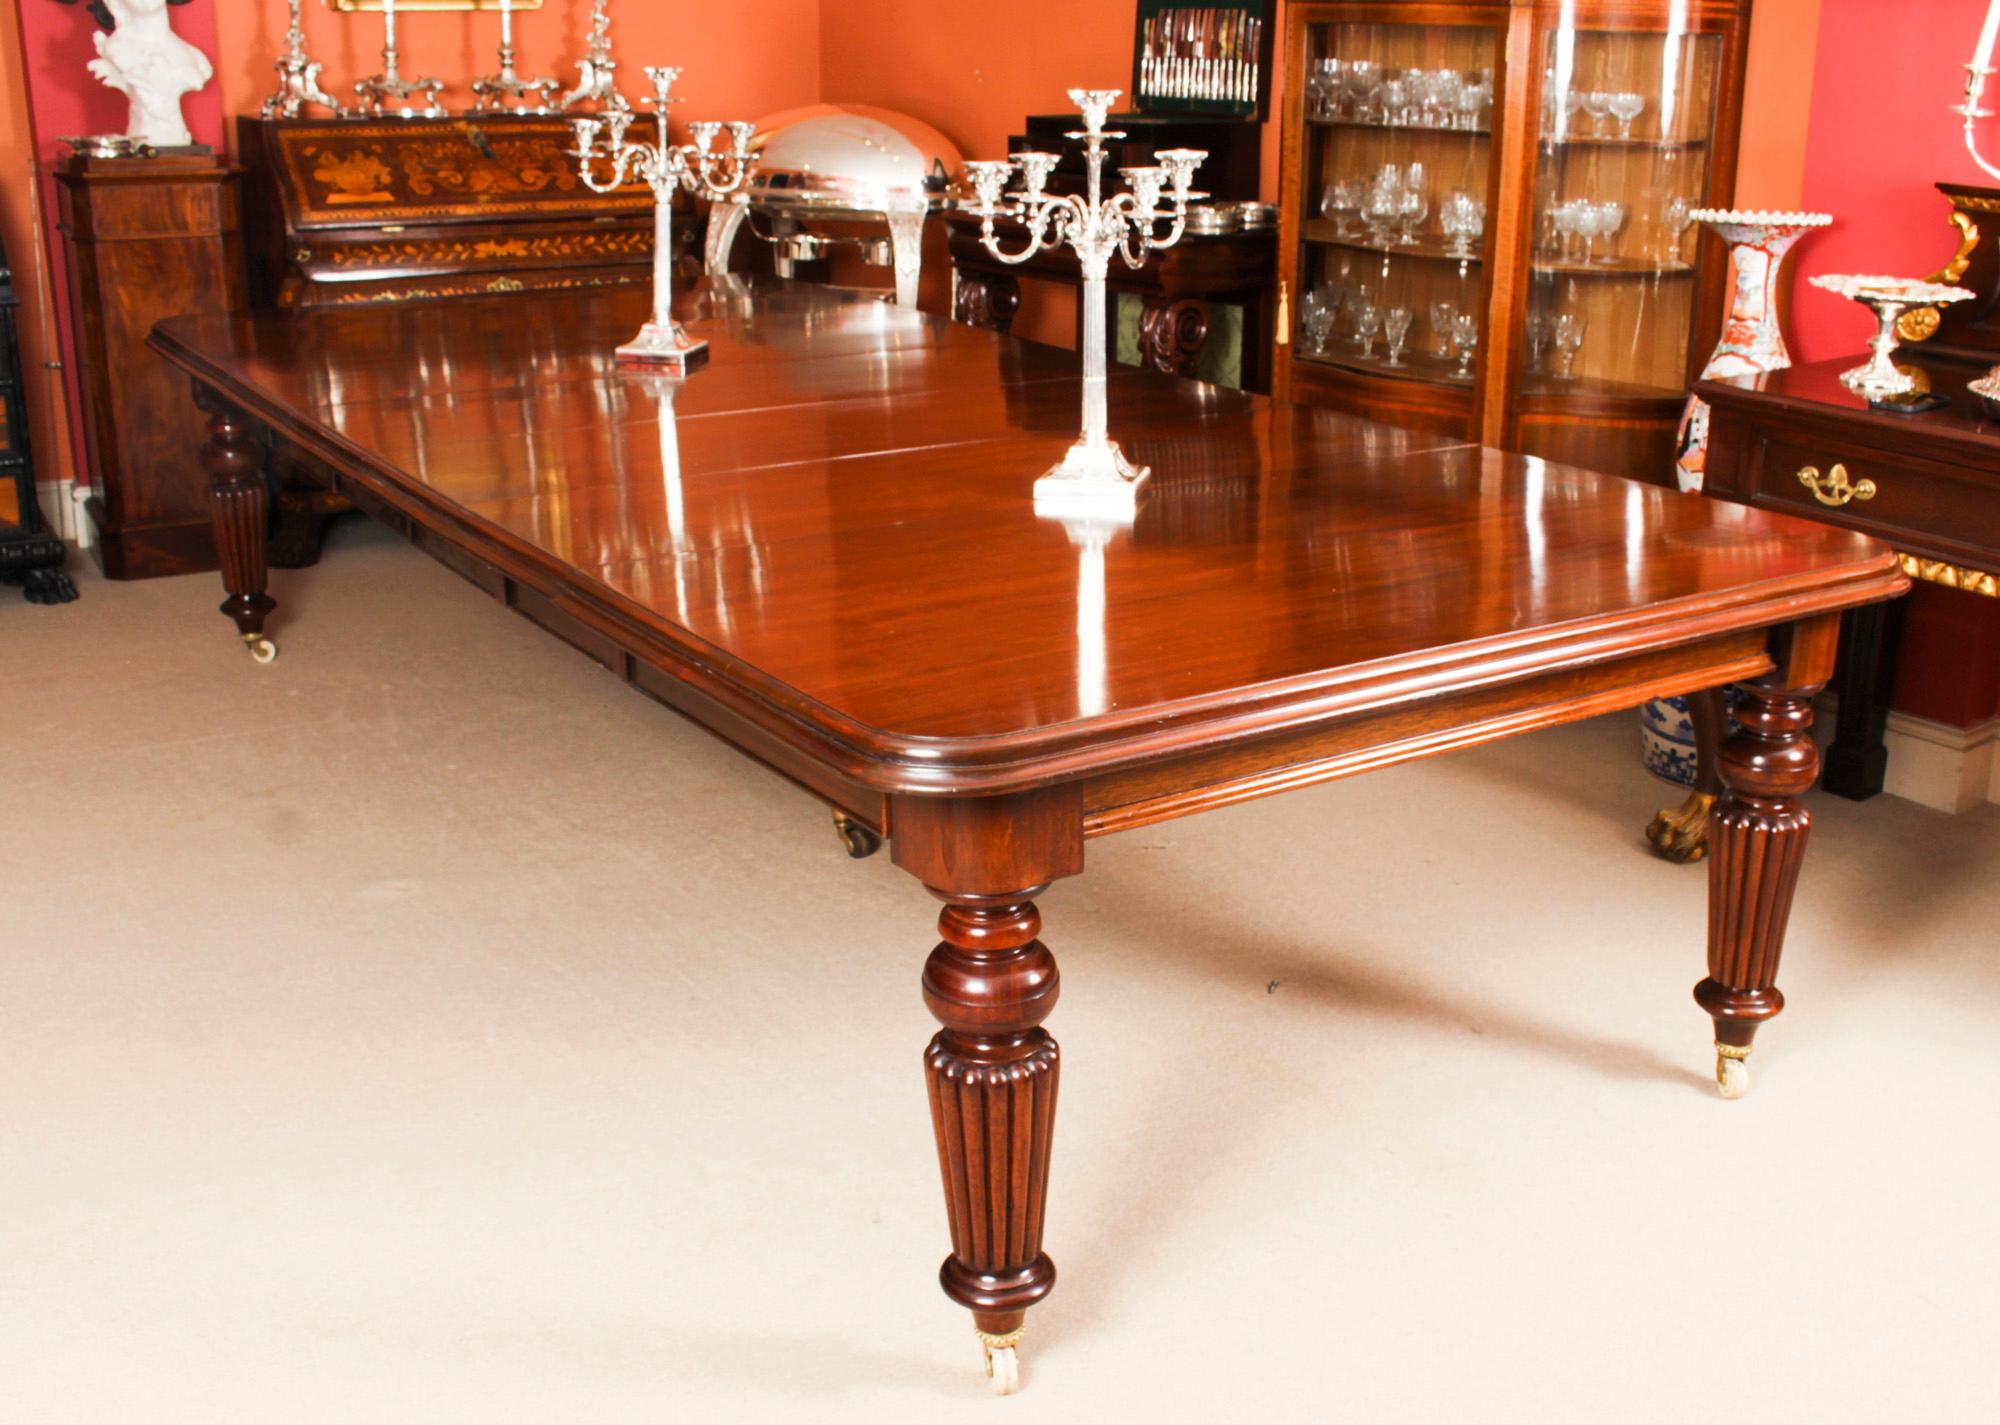 This is a rare opportunity to own an antique early Victorian, flame mahogany dining or conference table which can seat up to fourteen people in grand comfort, and dates from Circa 1850..

It has four original leaves which can be added or removed as